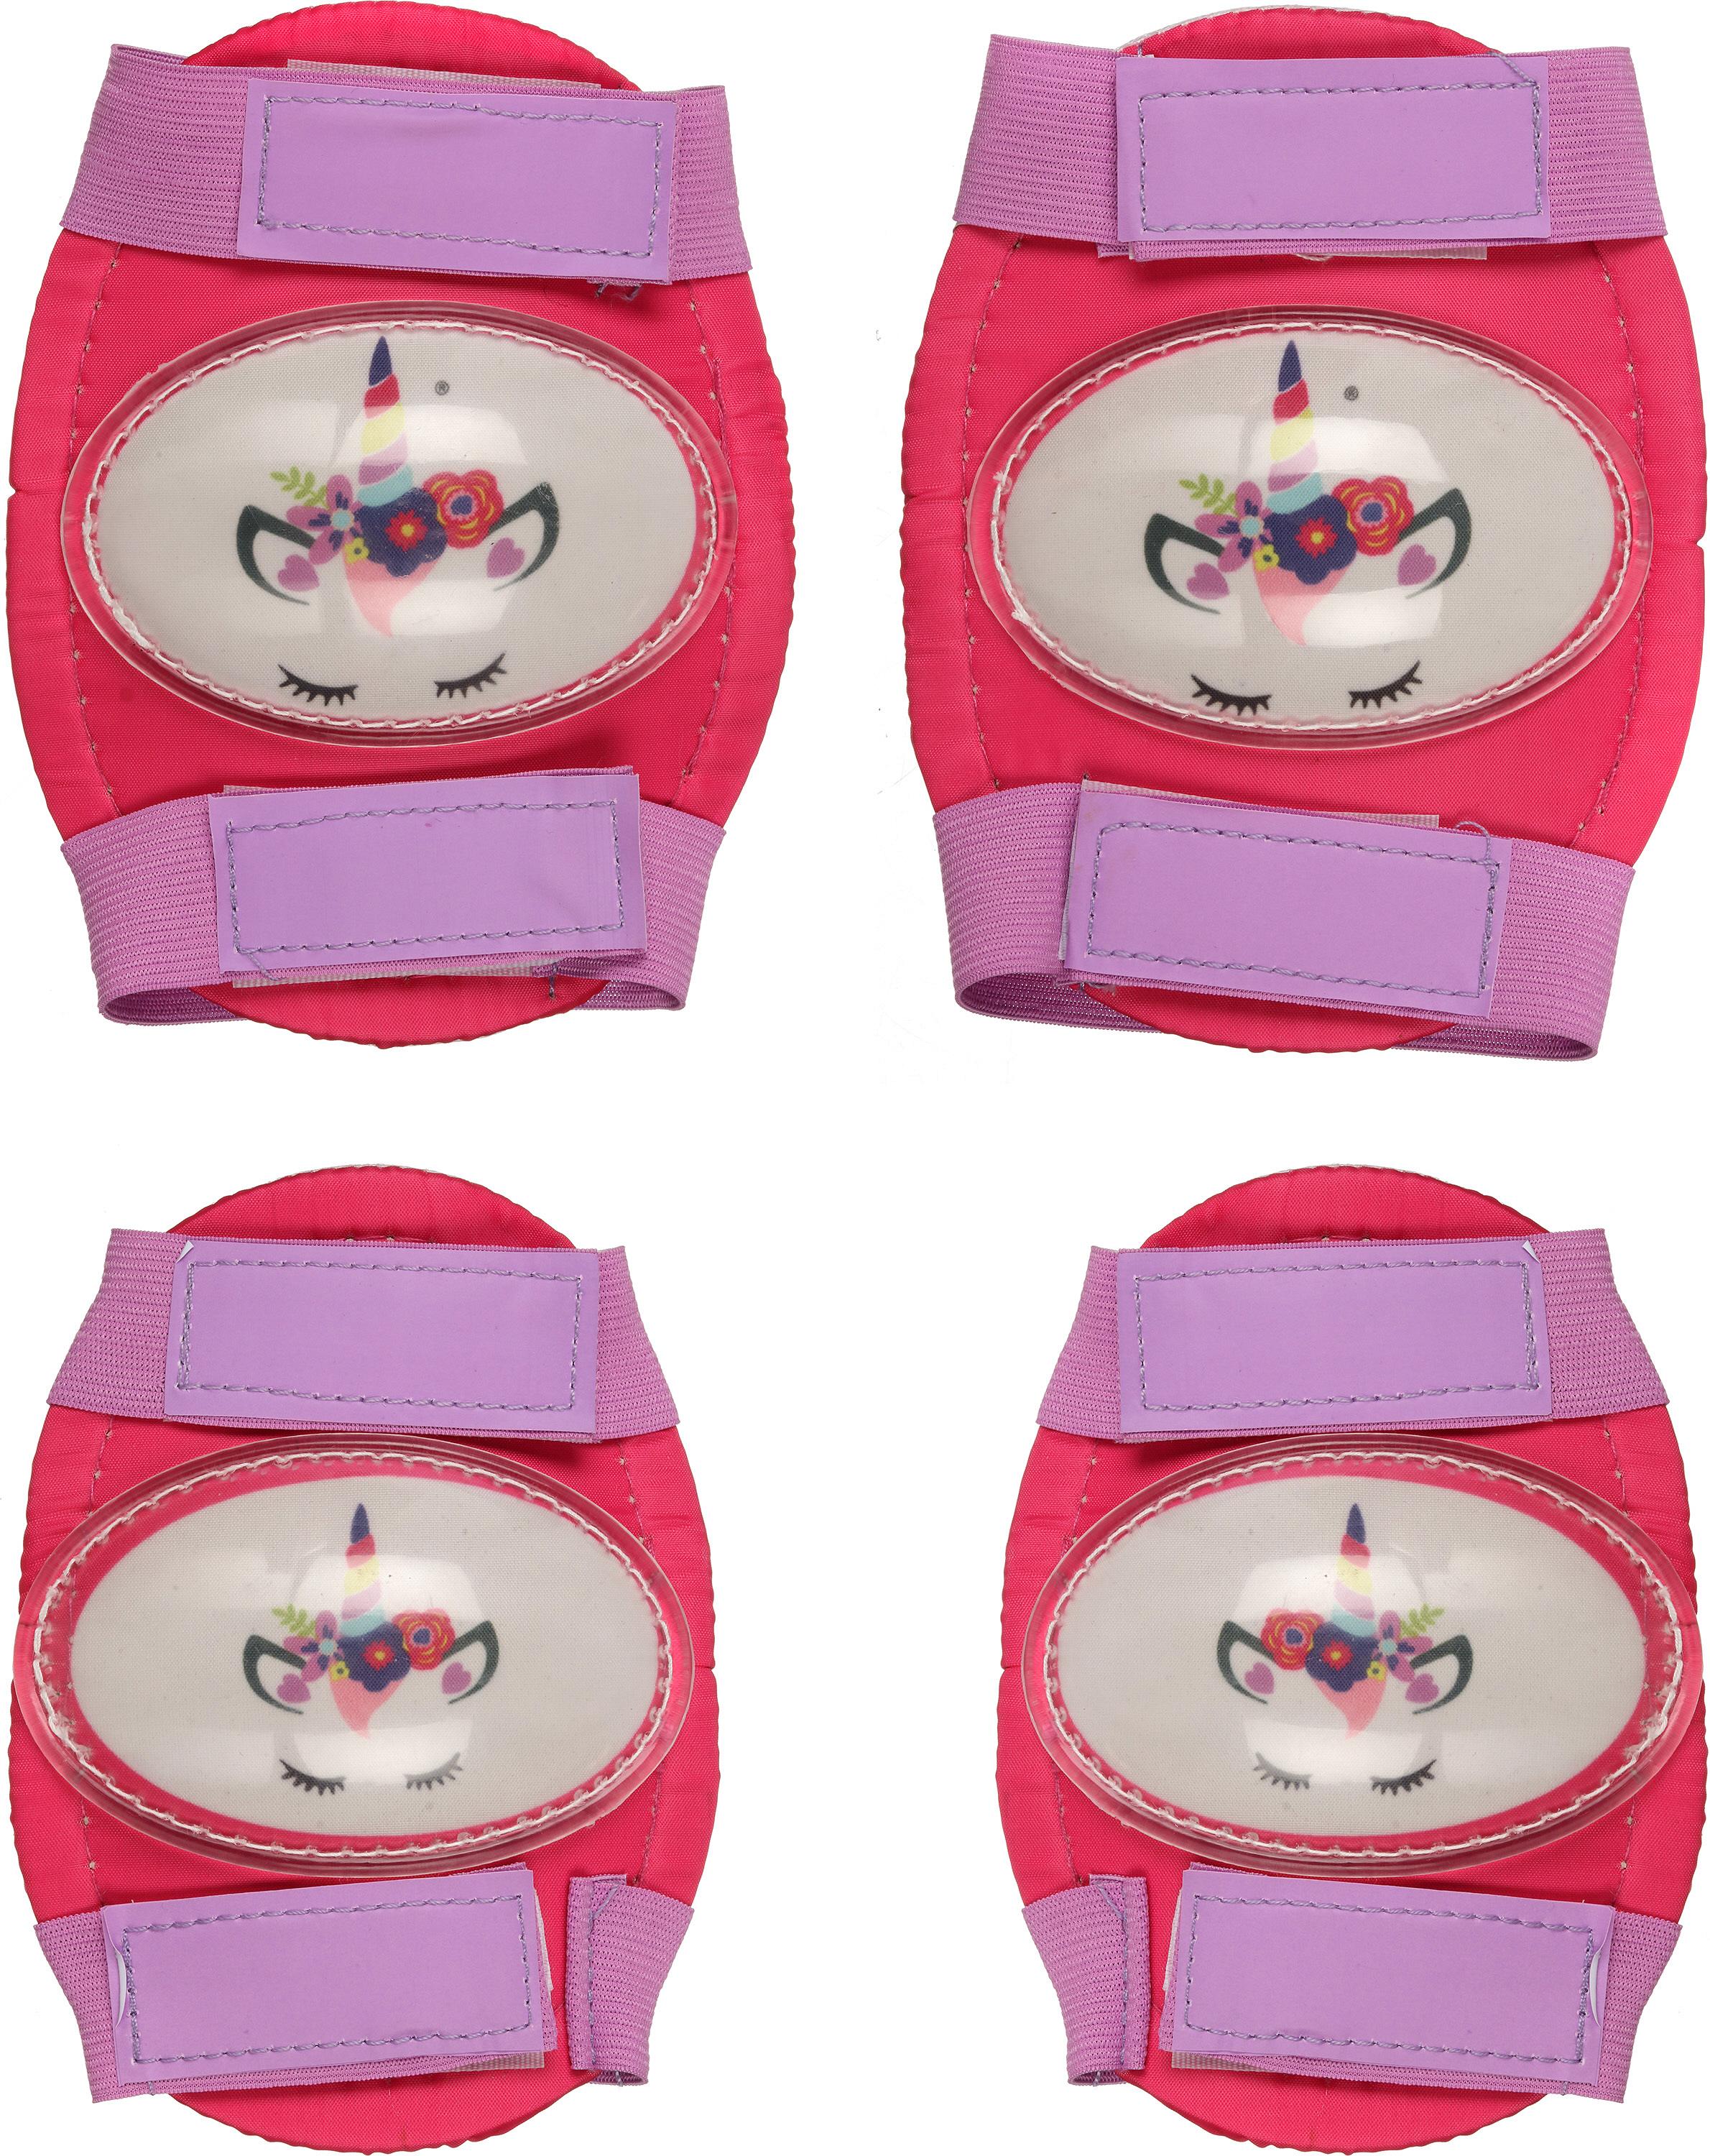 Apollo Twinkles Pads